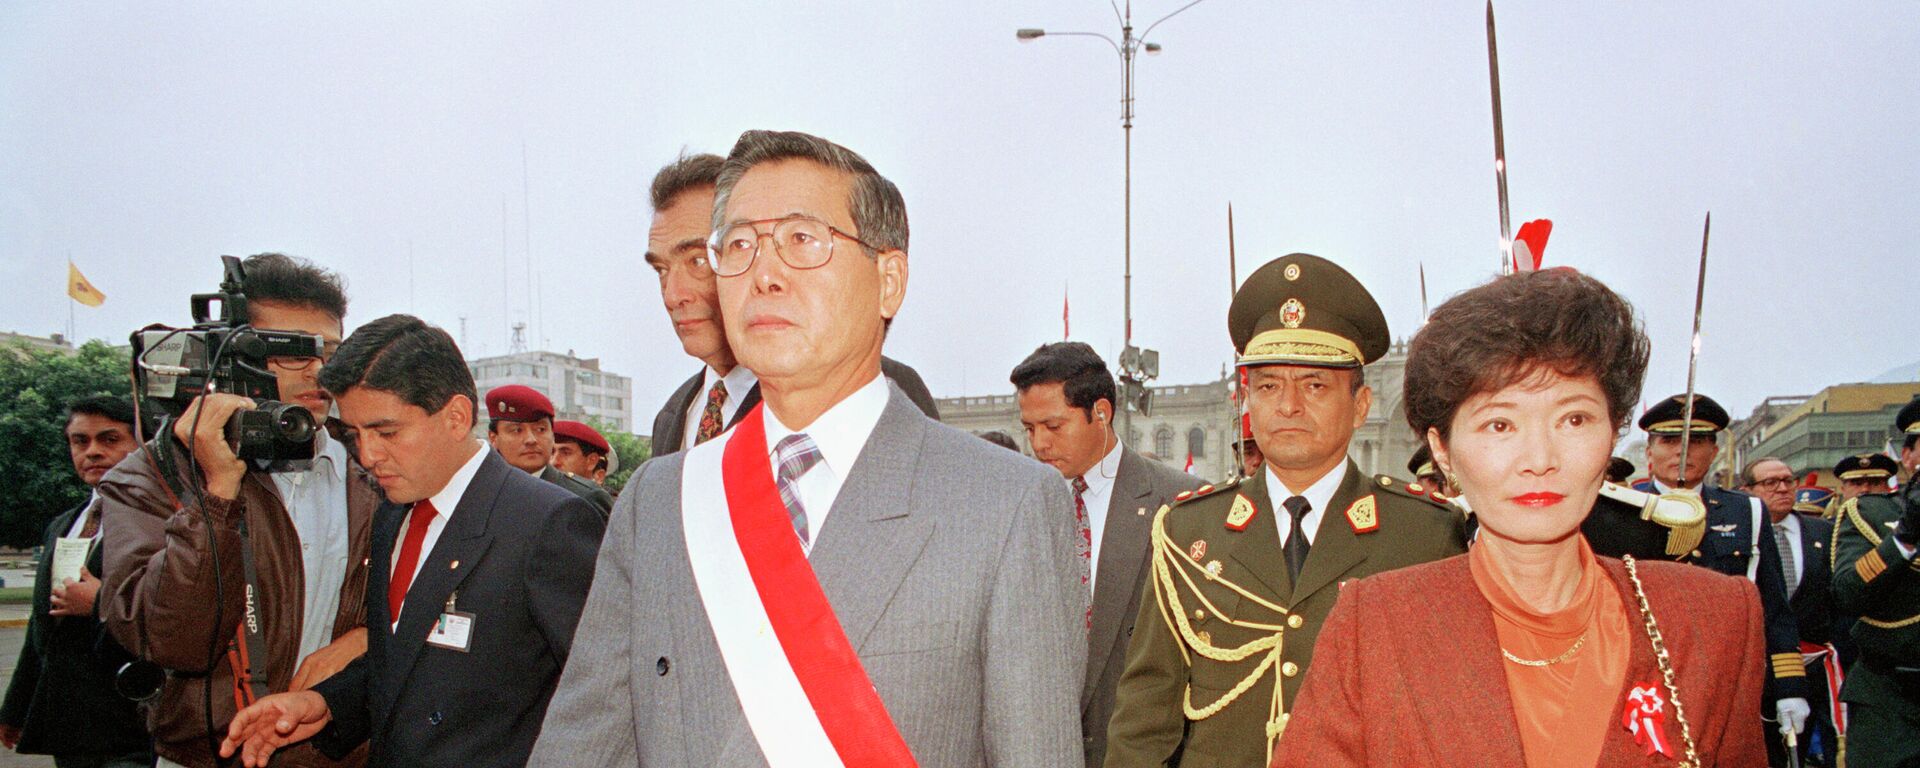 Peruvian President Alberto Fujimori and first lady Susana Higuchi attend an Independence Day celebration, in their last public appearance together, in Lima, Peru, July 28, 1994. Higuchi died on Wednesday, Dec. 8, 2021 at the age of 73, confirmed her daughter Keiko Fujimori. - Sputnik International, 1920, 17.03.2022